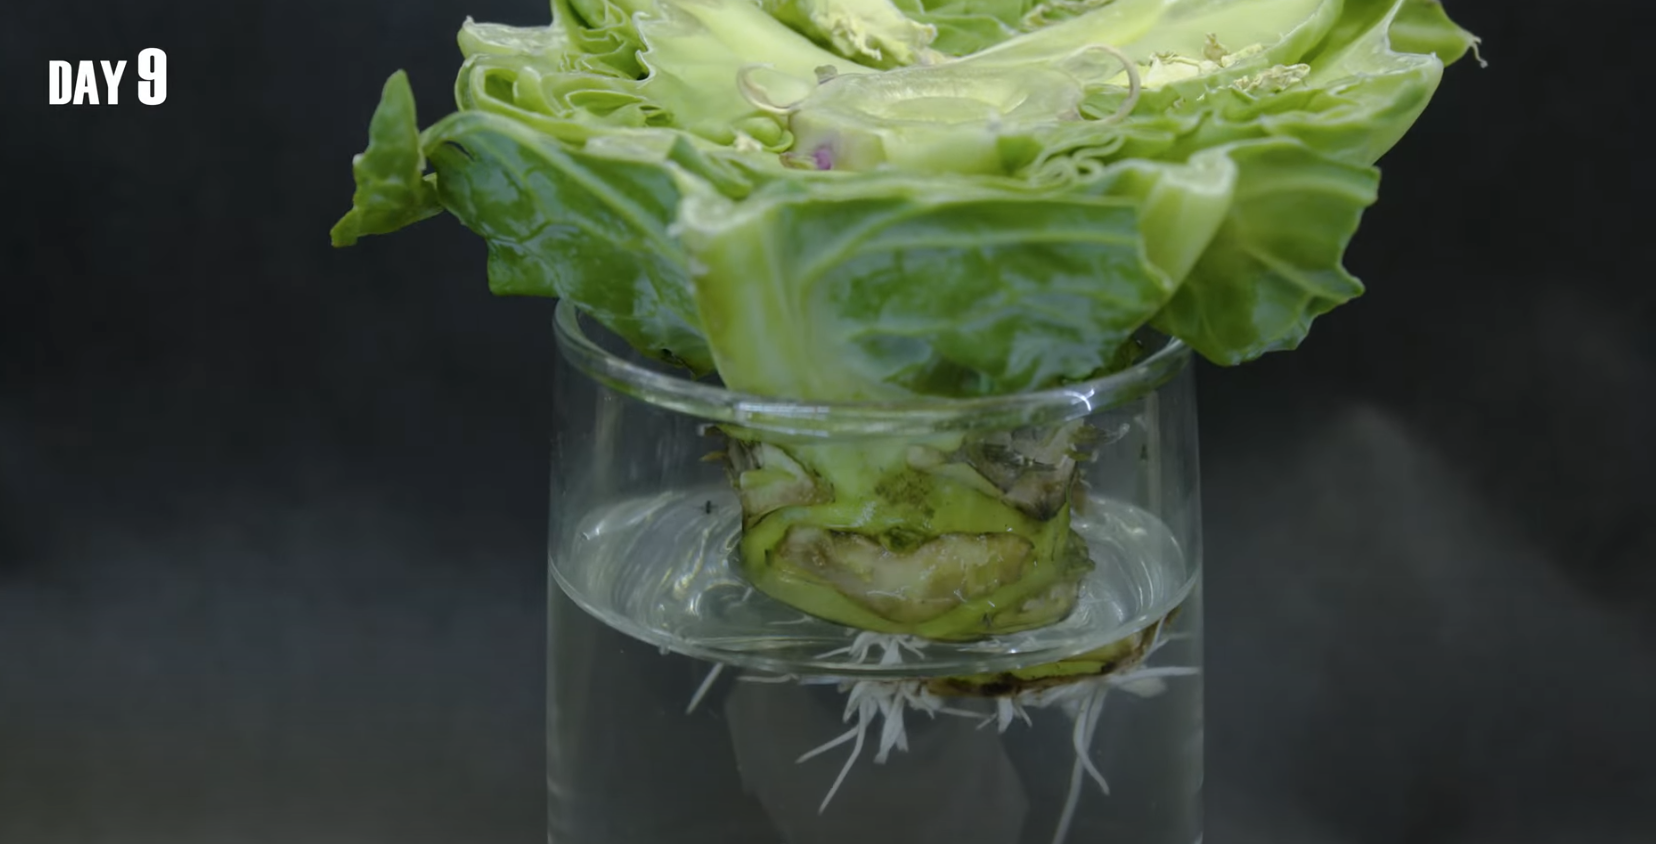 grow cabbage indoors from scraps at home water day 10